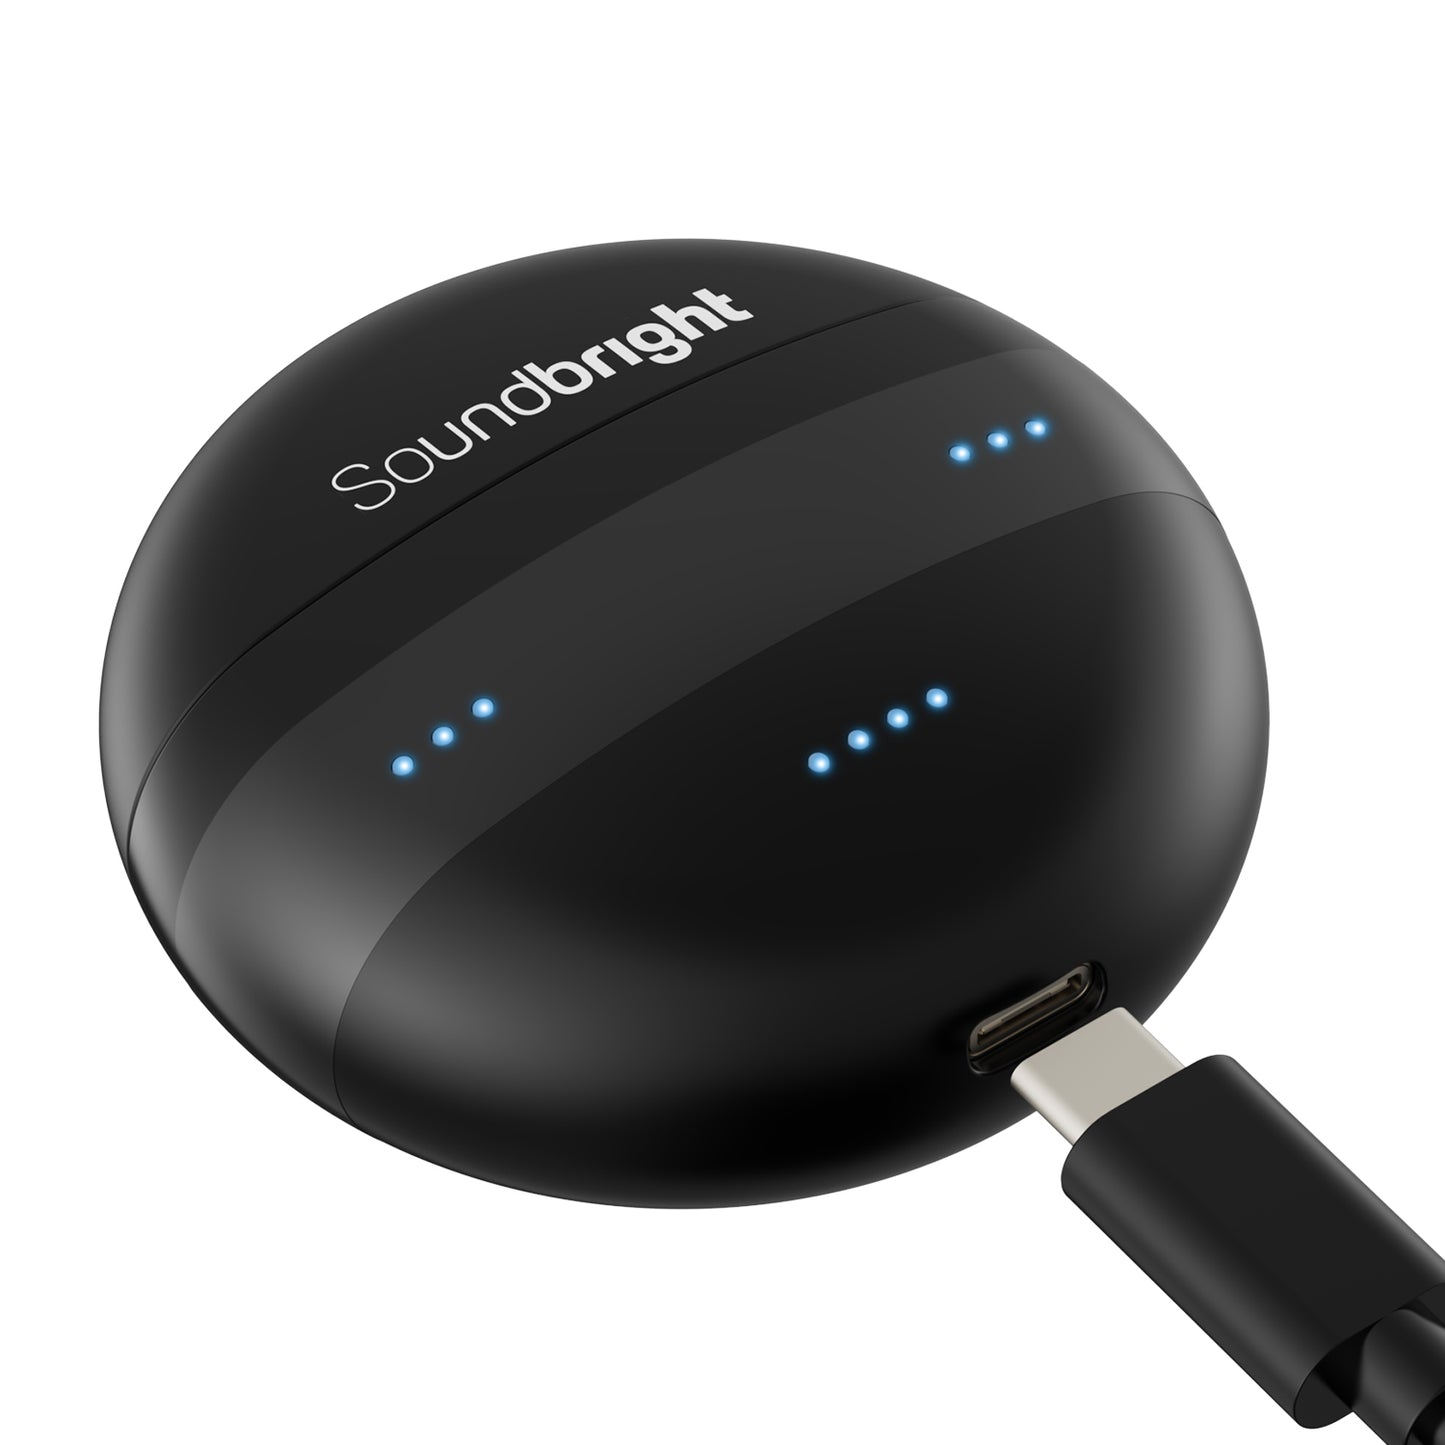 Soundbright Mini in-the-ear hearing aids closed charging case with charging cord